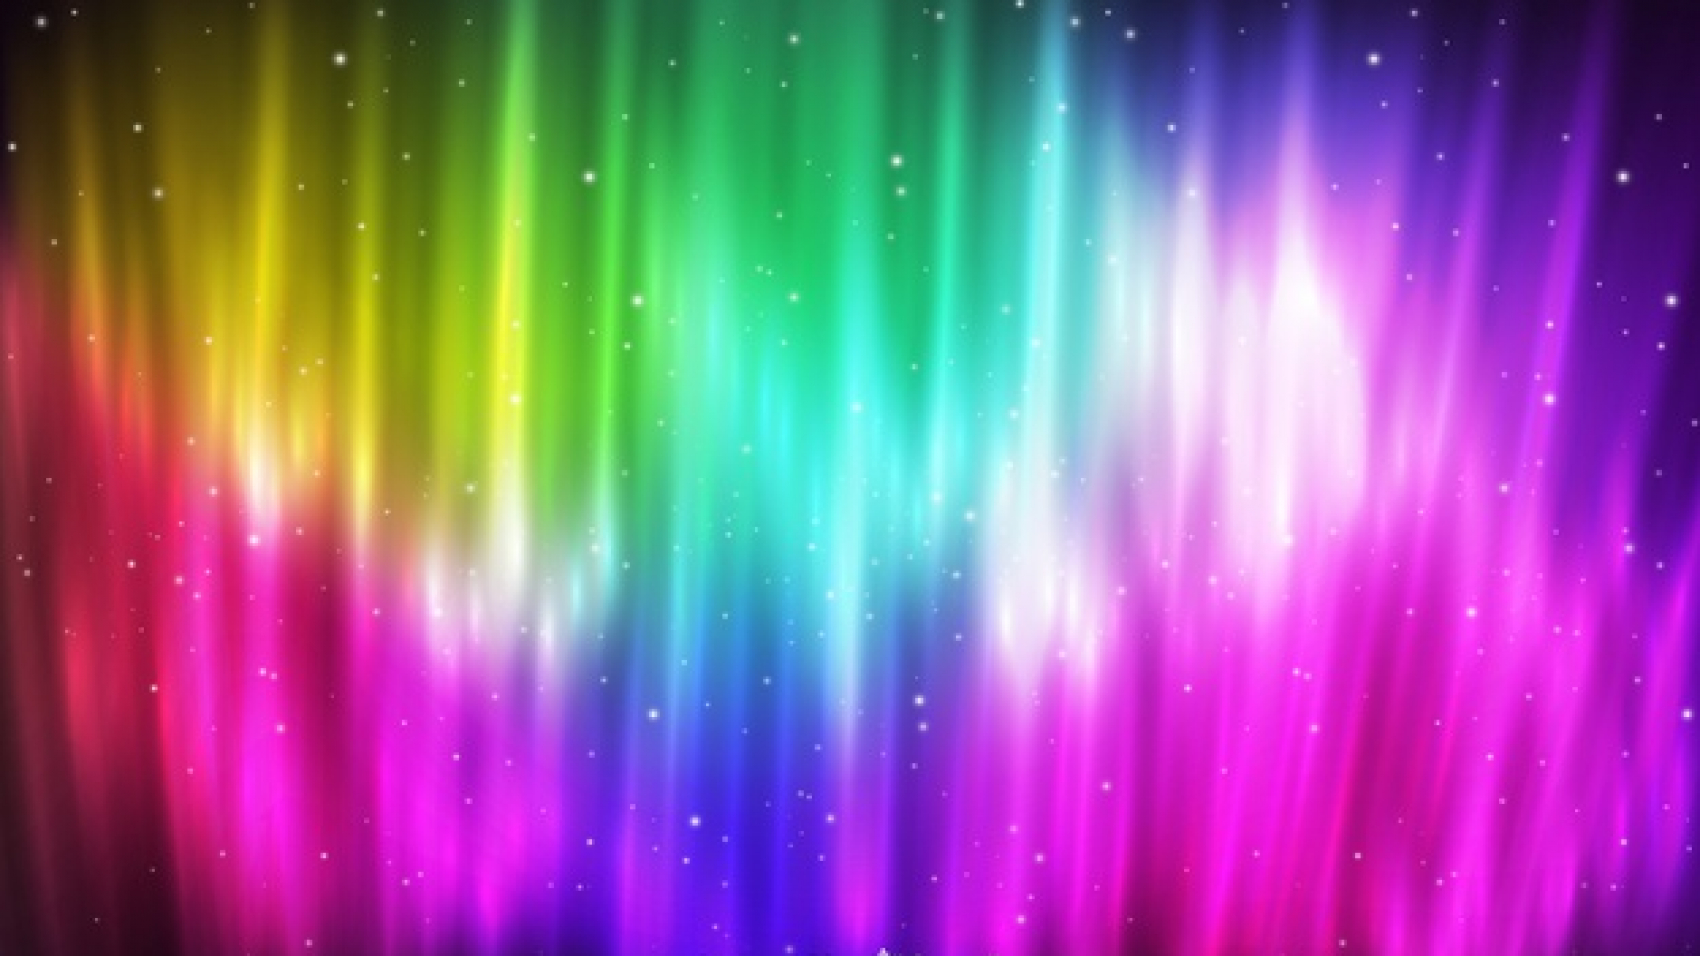 northern-colourful-lights-background_23-2148260405